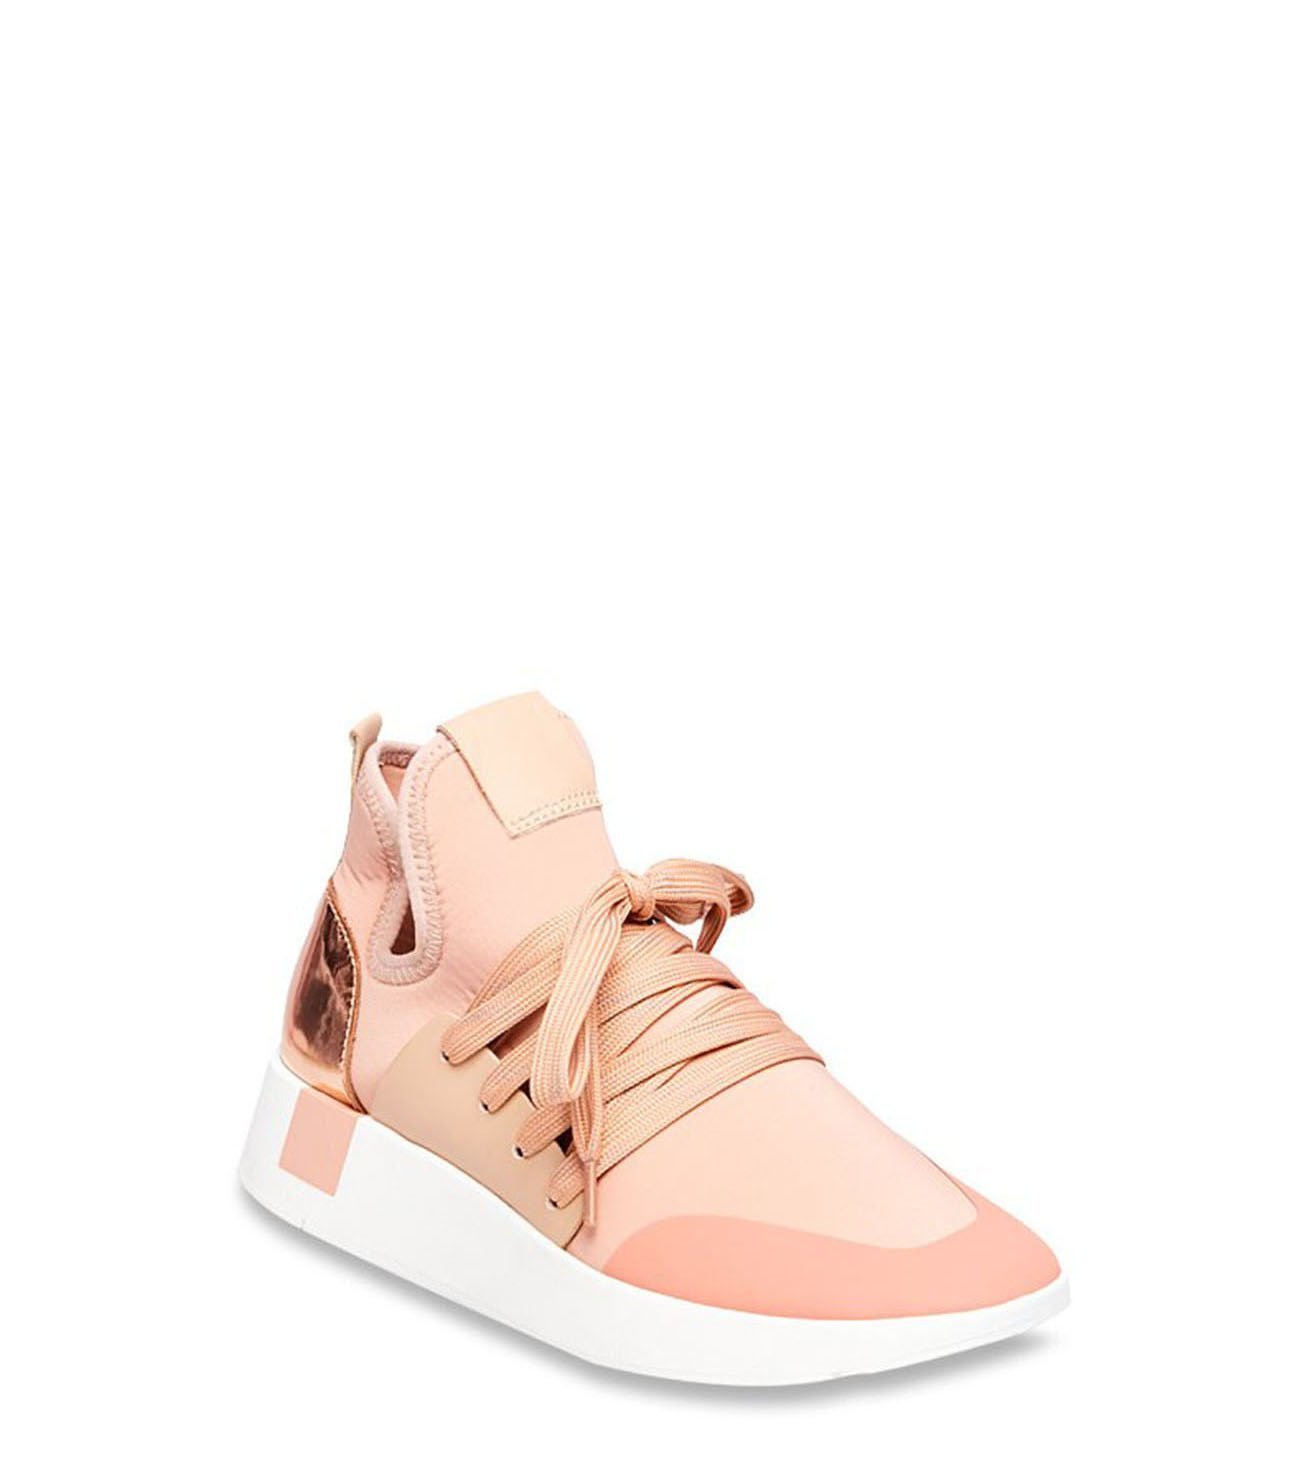 Steve Madden Shady Blush Pink Sneakers 